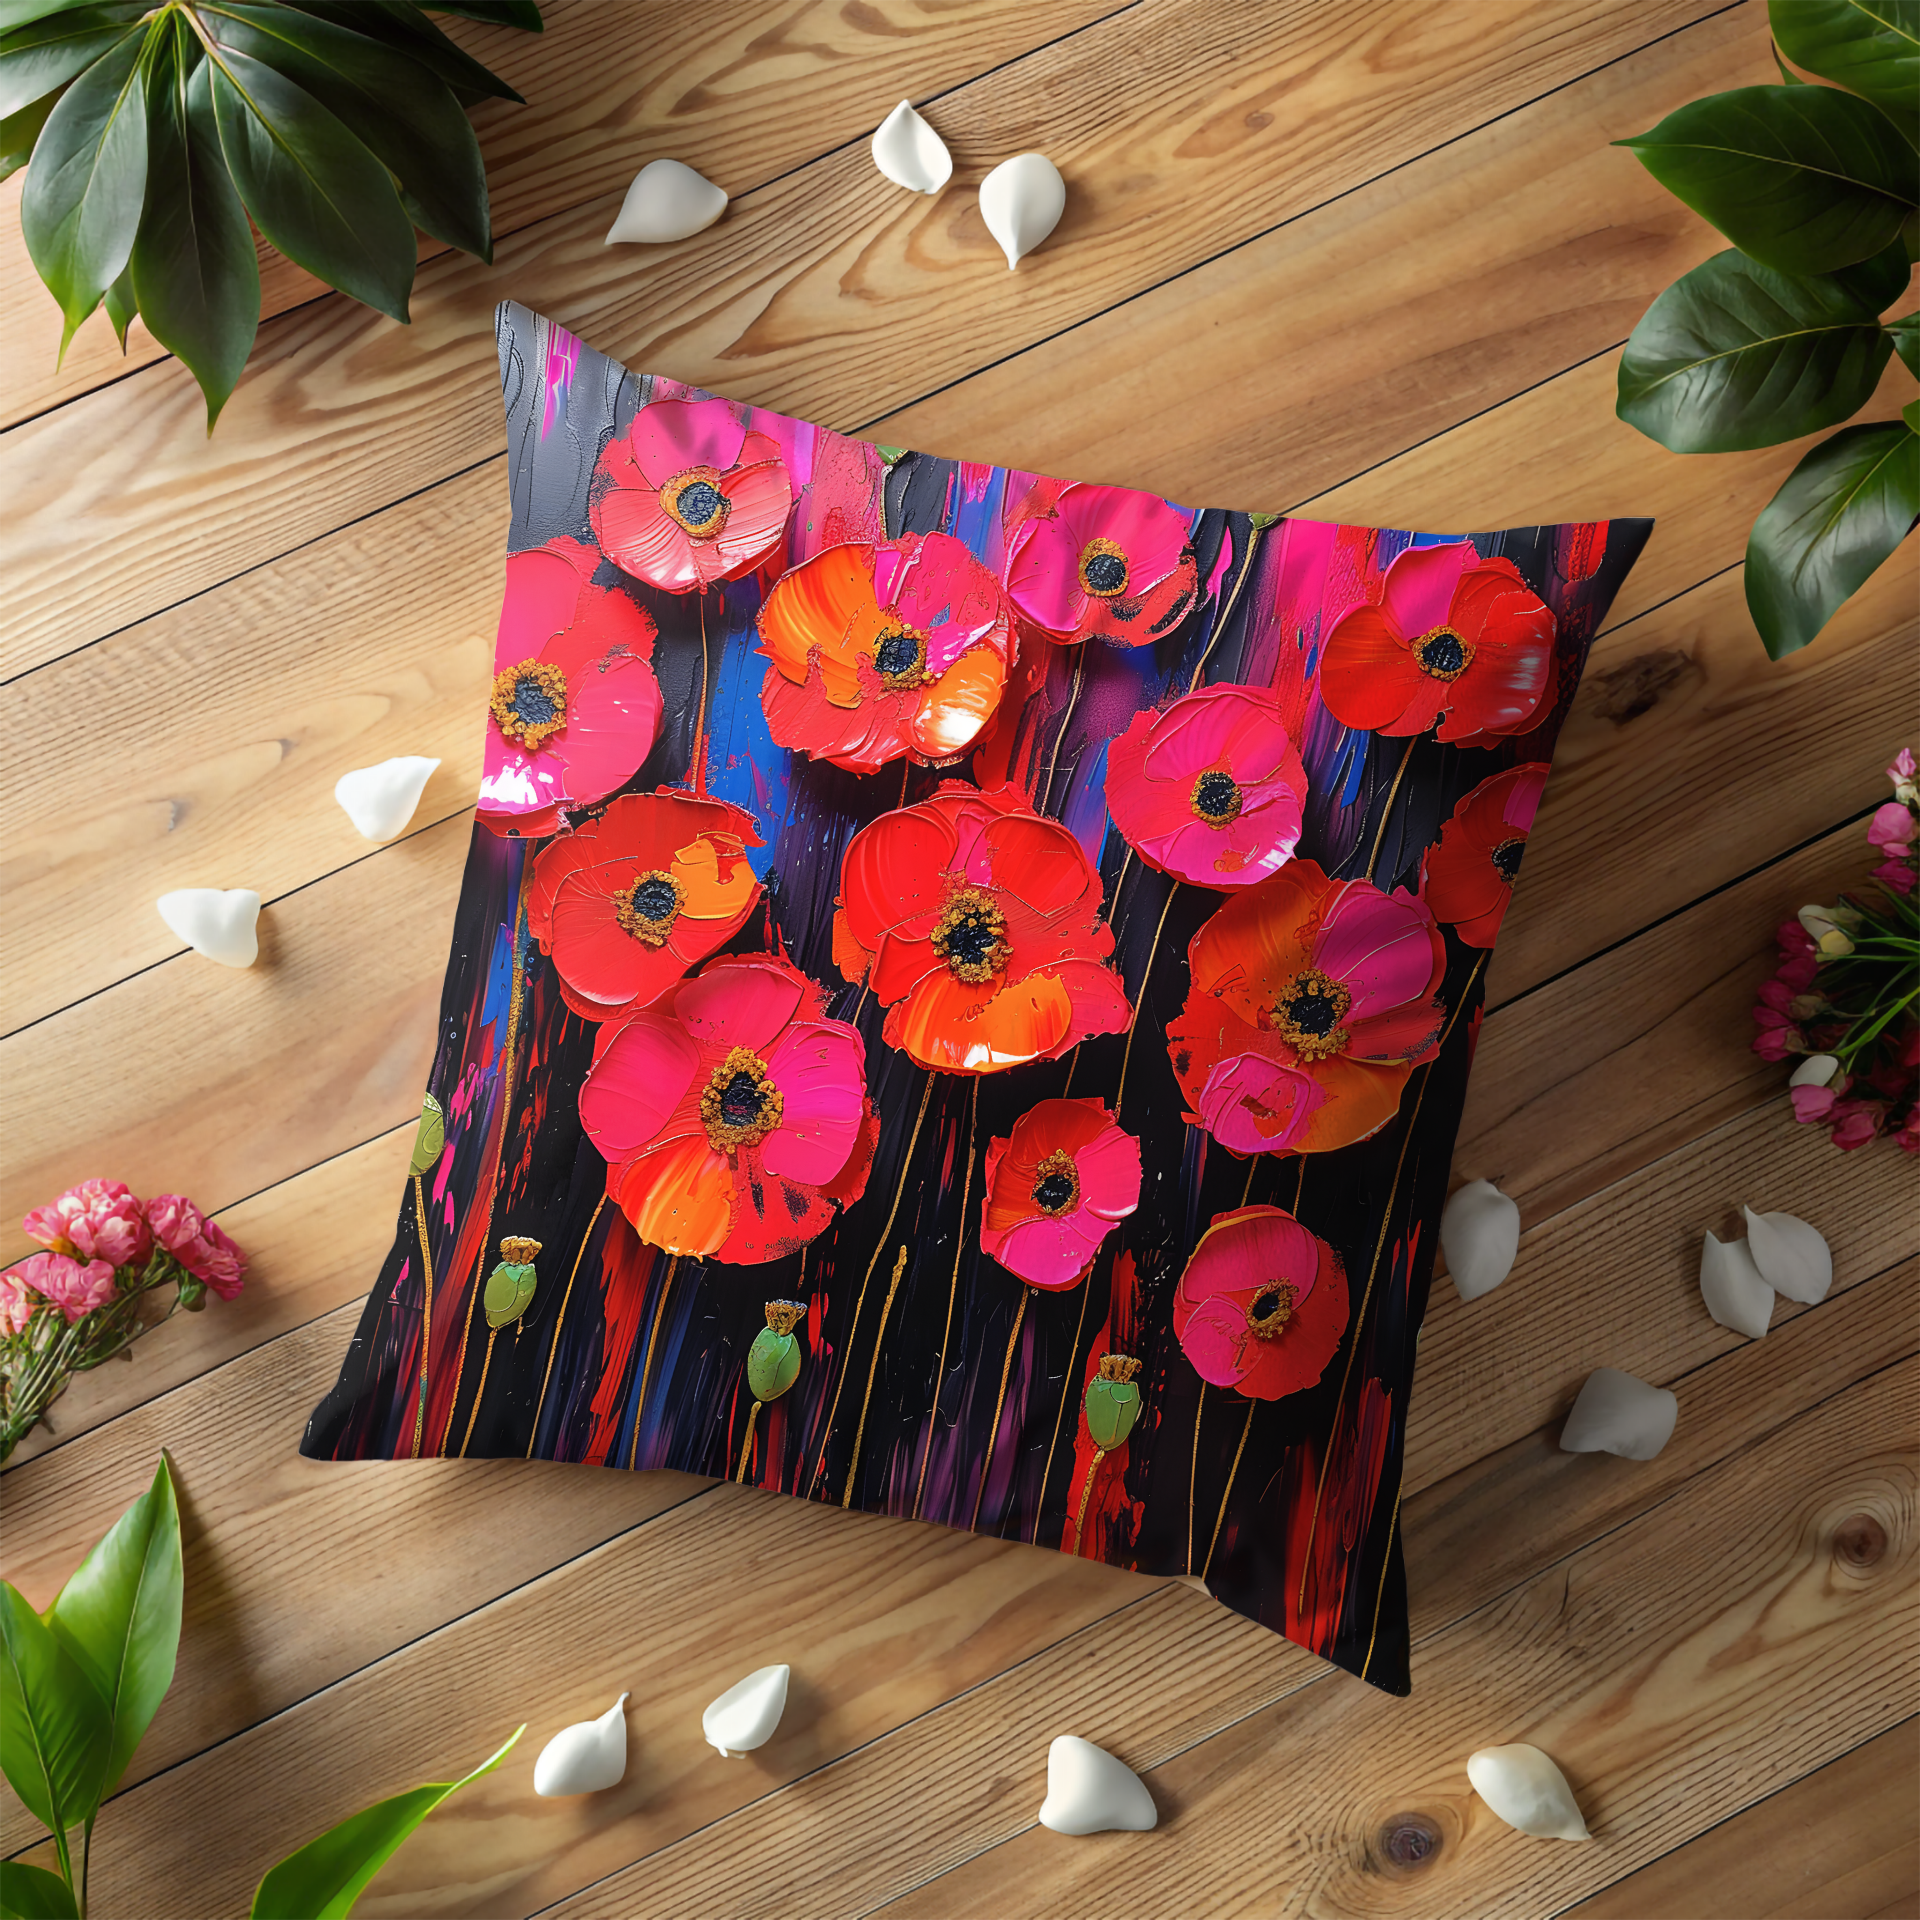 Poppies Paradise: Watercolor Poppies Decorative Pillow Cover